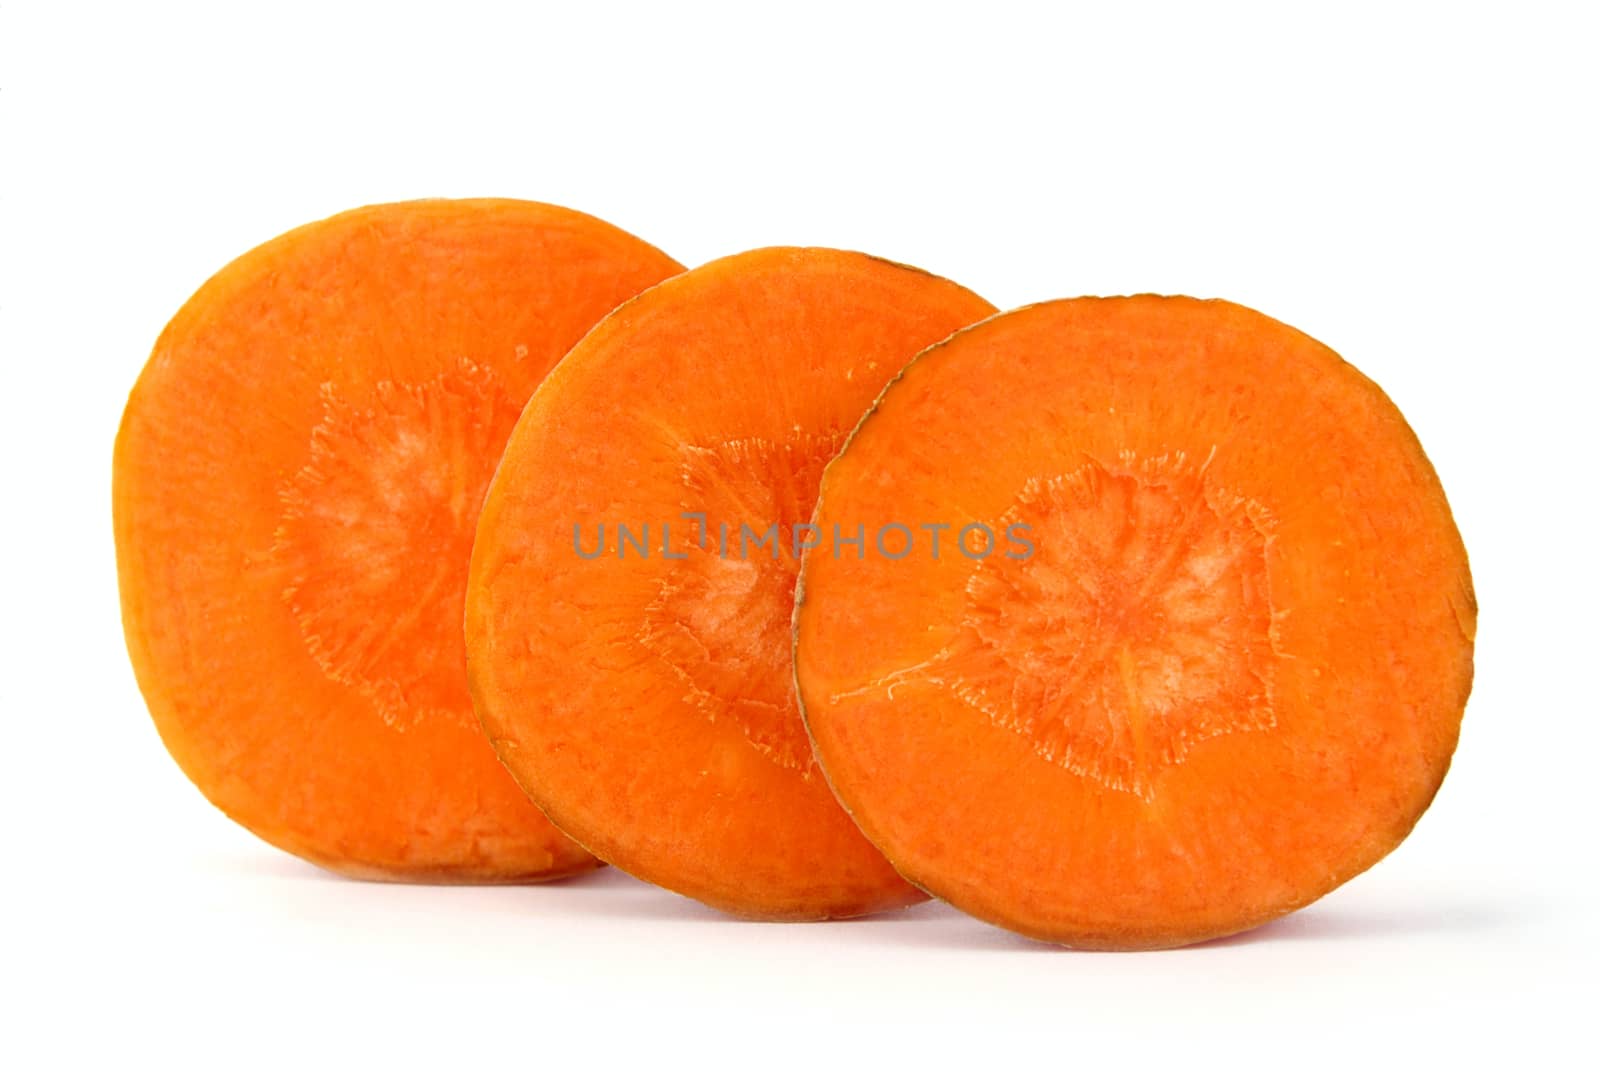 Carrot is cut by rings on a white background